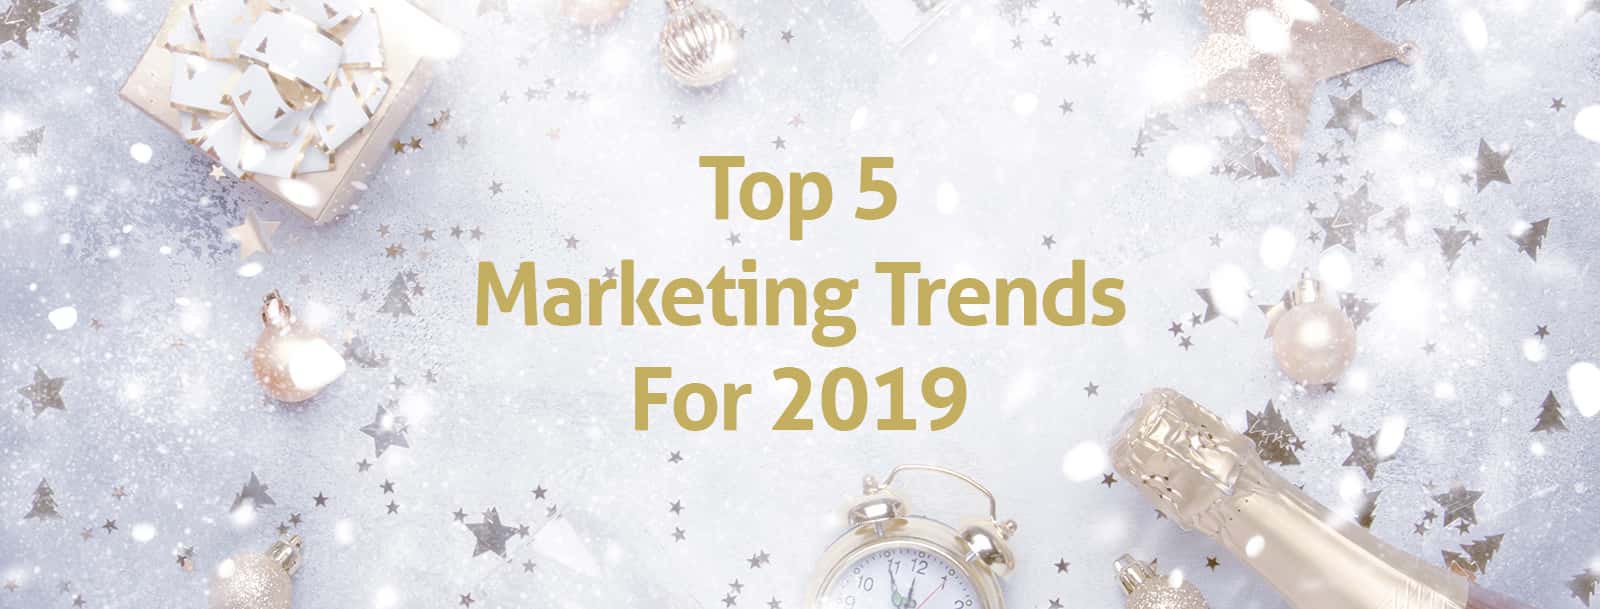 Top 5 New Marketing Trends for 2019